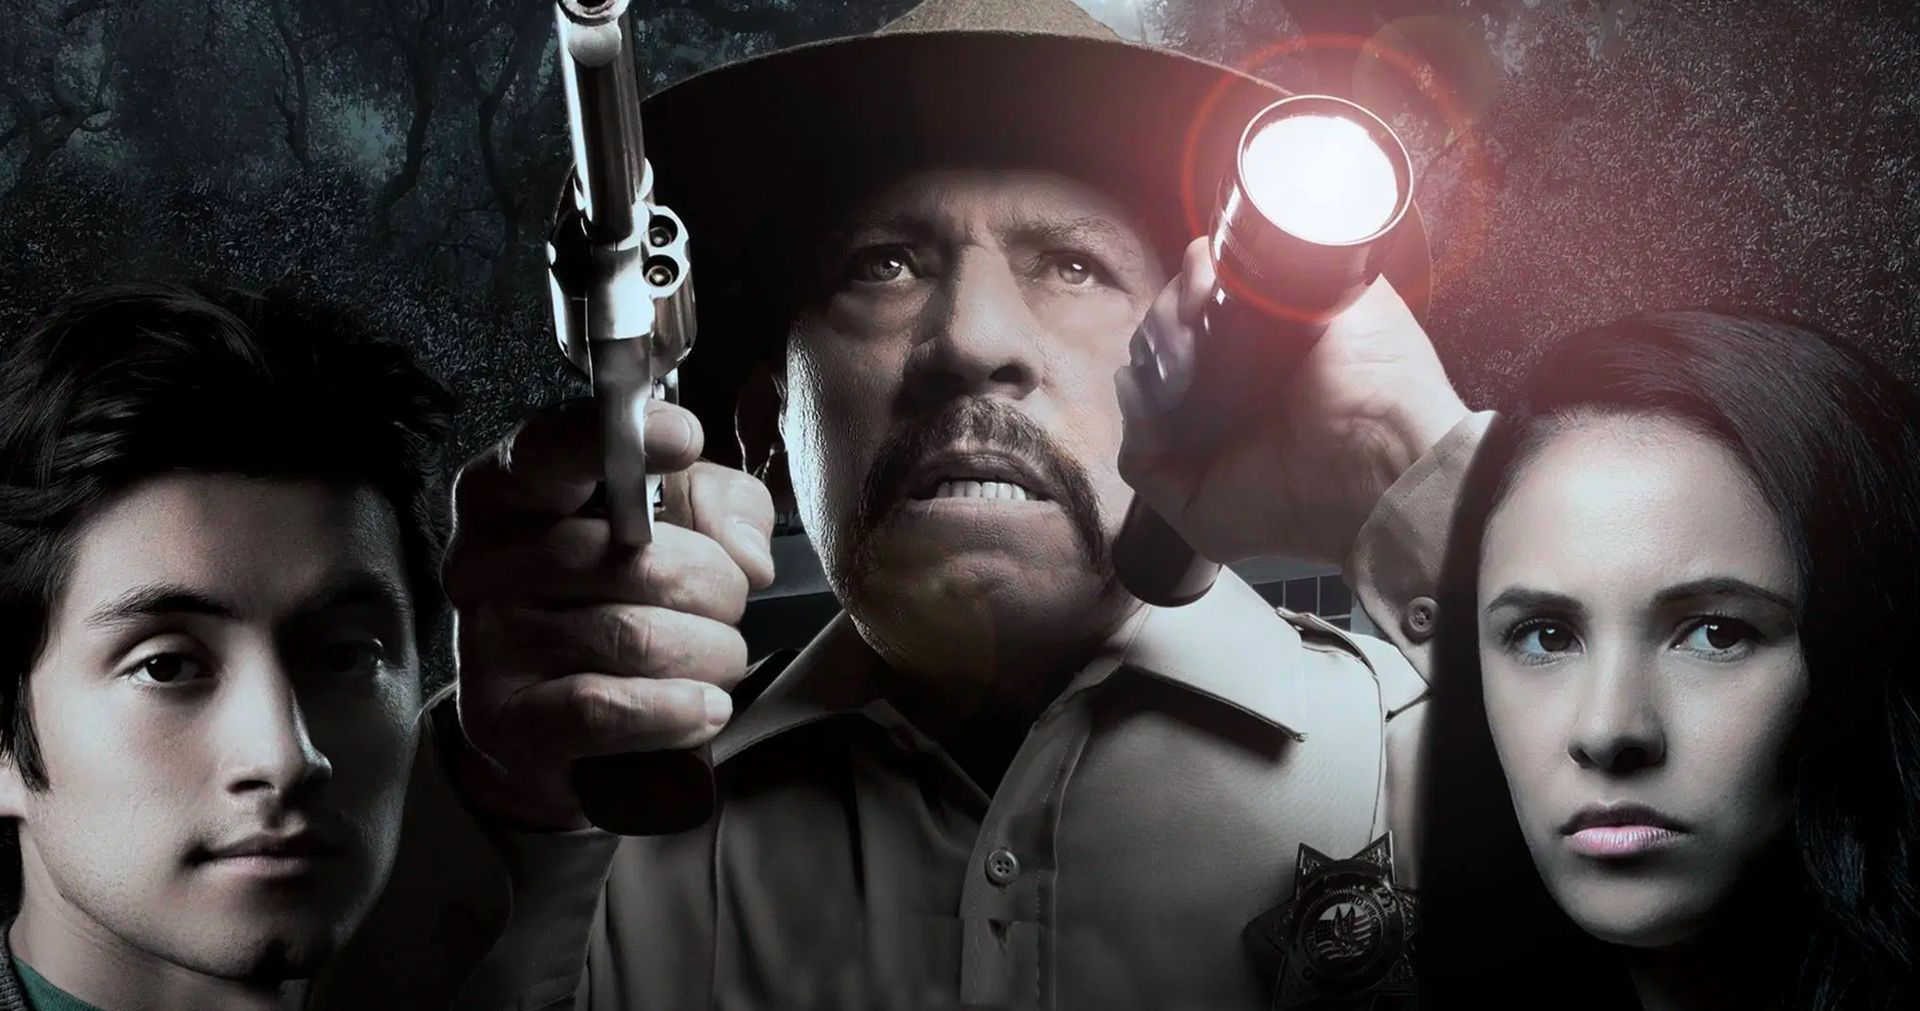 Murder in the Woods Preview Has Danny Trejo Digging Up a Dark Secret [Exclusive]